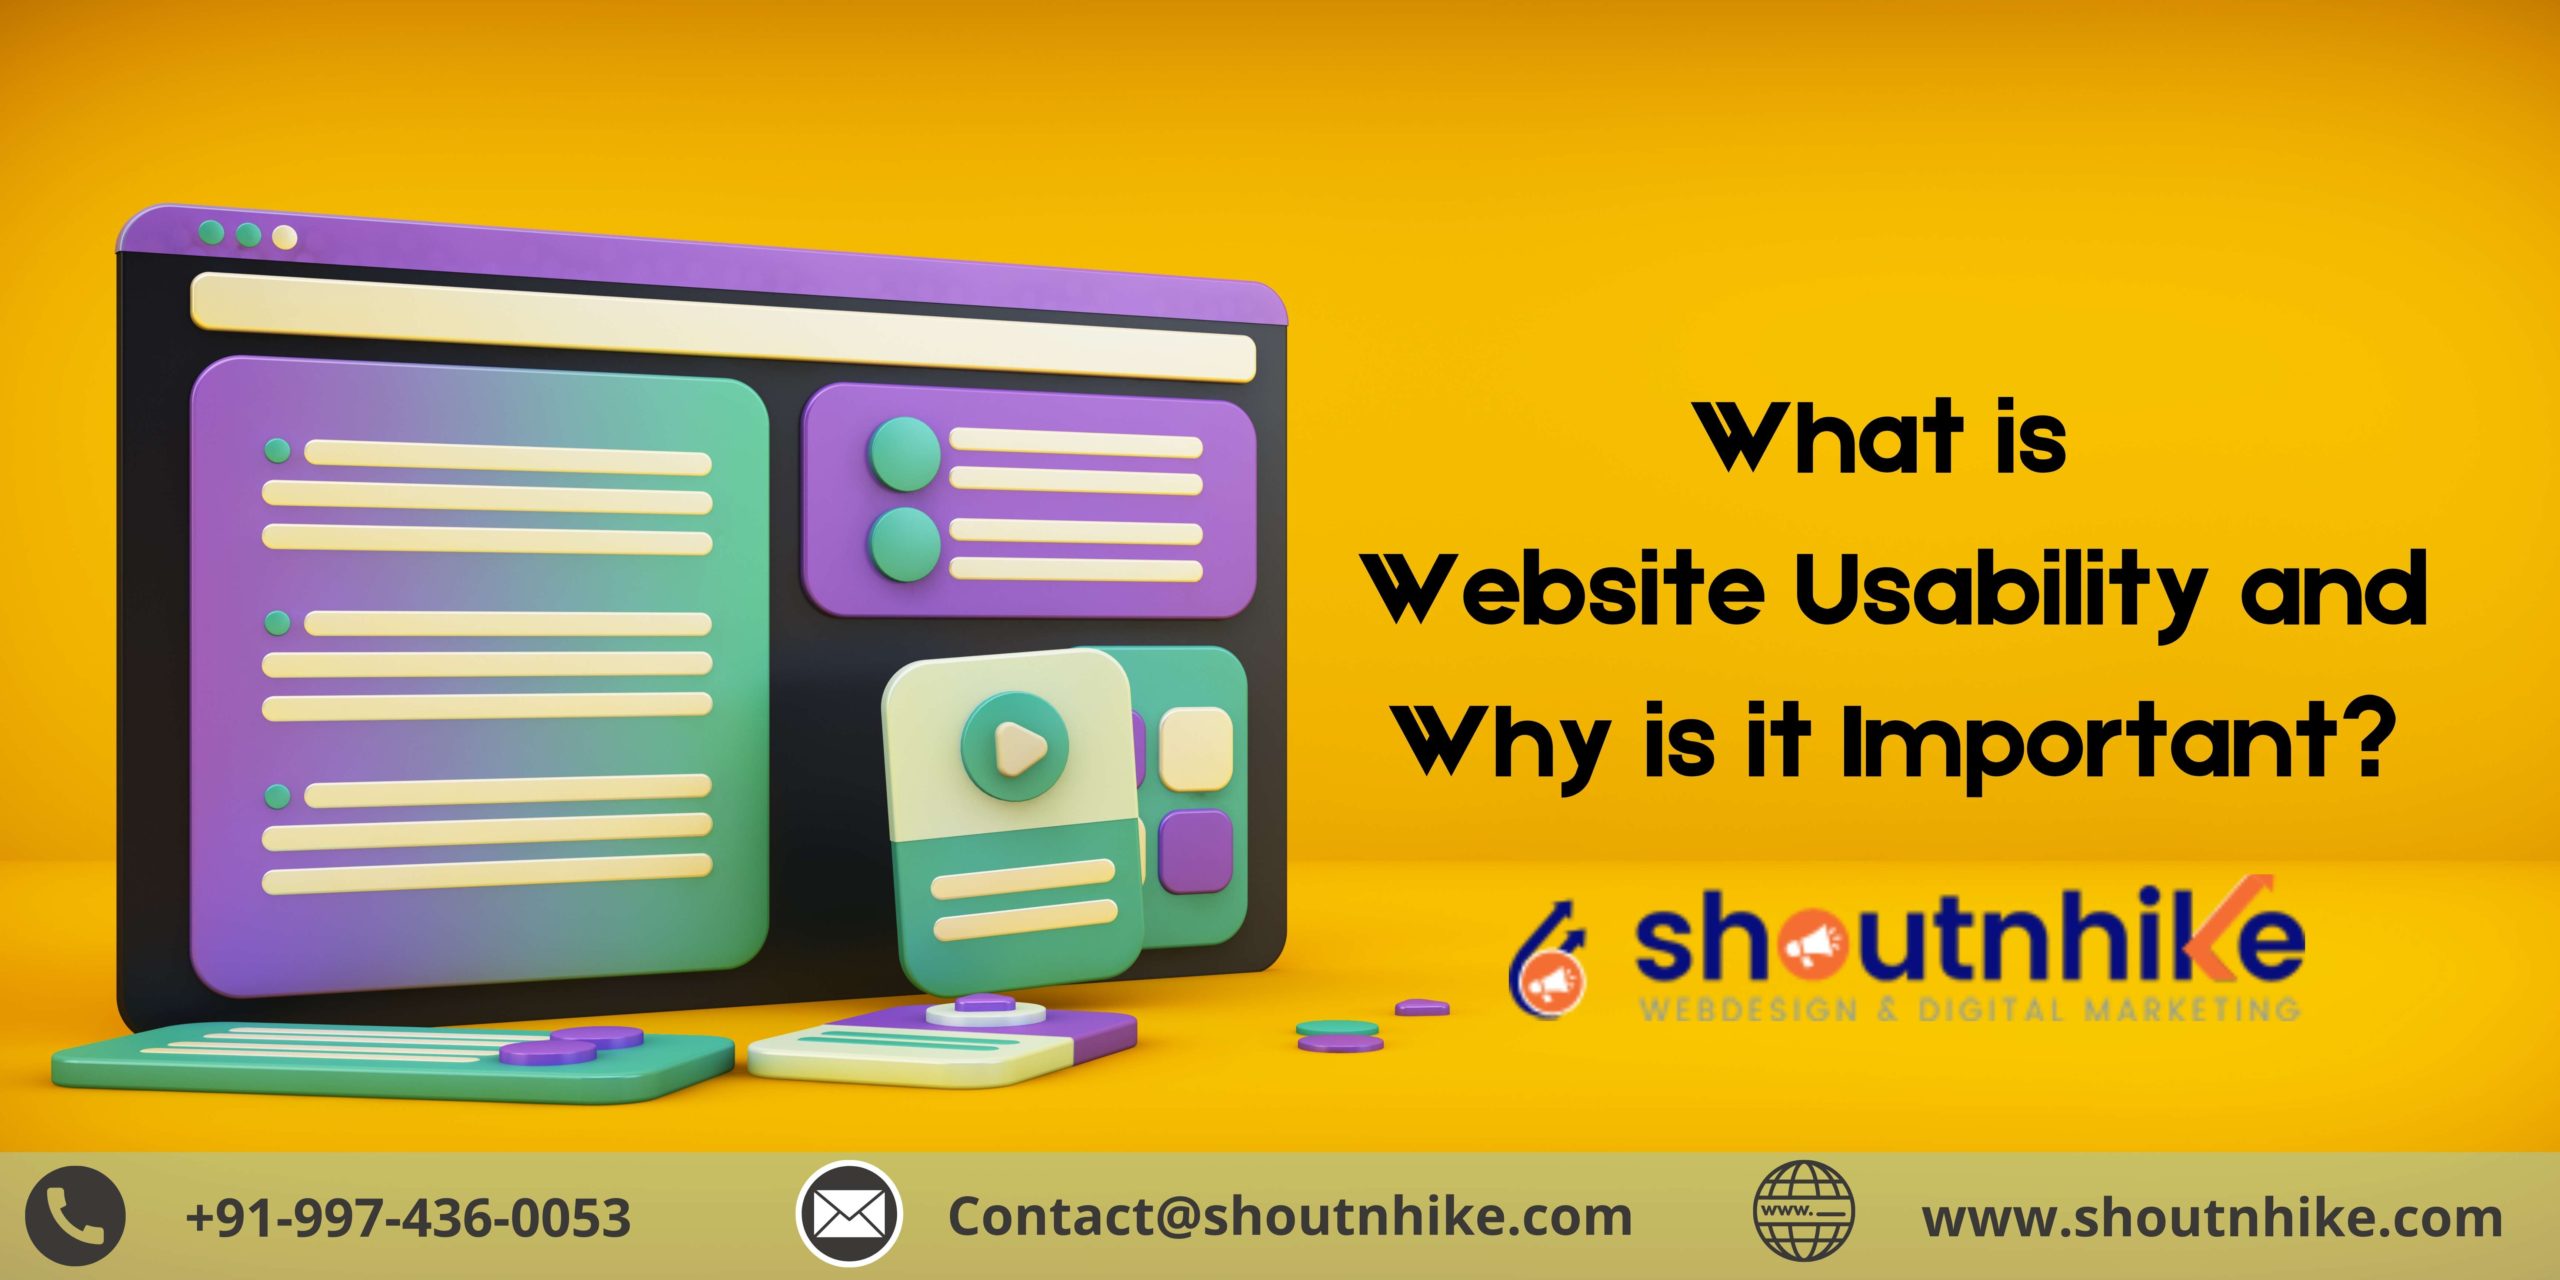 What is Website Usability and Why is it Important